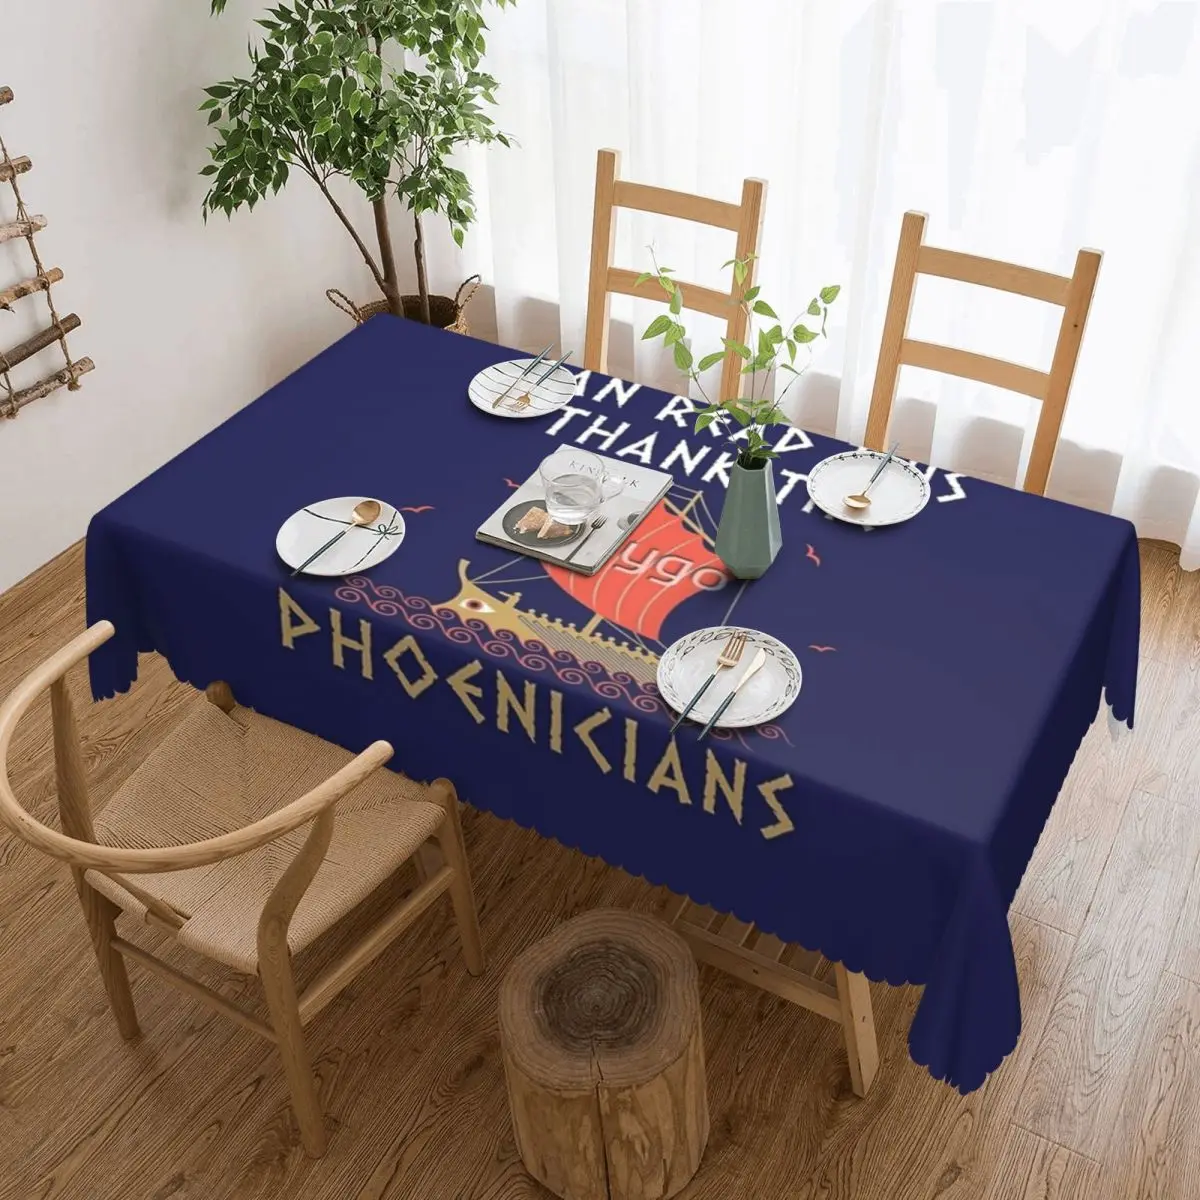 

If You Can Read This Thank The Phoenicians Tablecloth 54x72in Waterproof Protecting Table Indoor/Outdoor